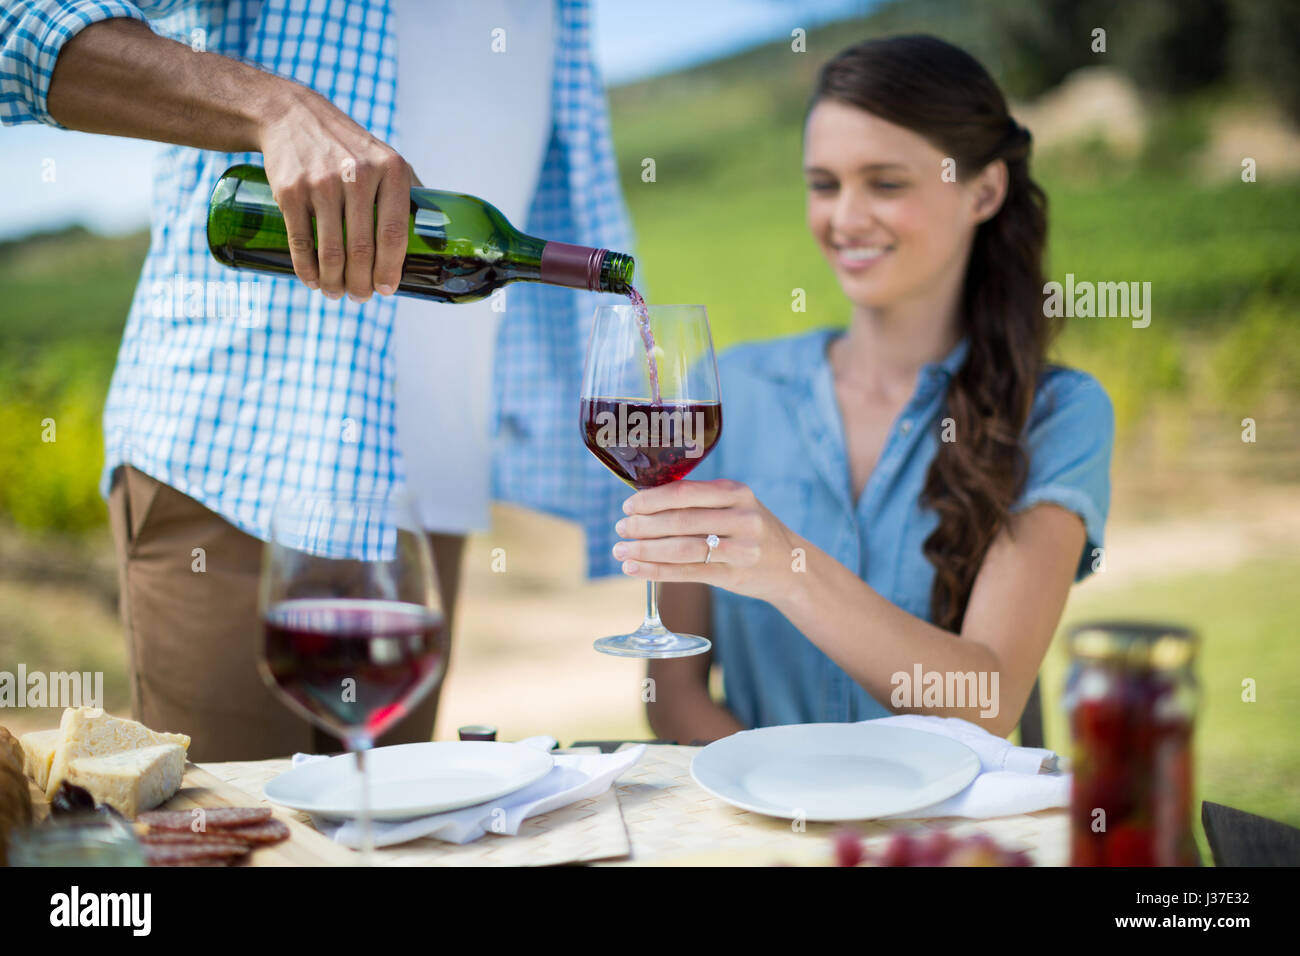 Man pouring red wine in glass held by woman sitting at table Stock Photo